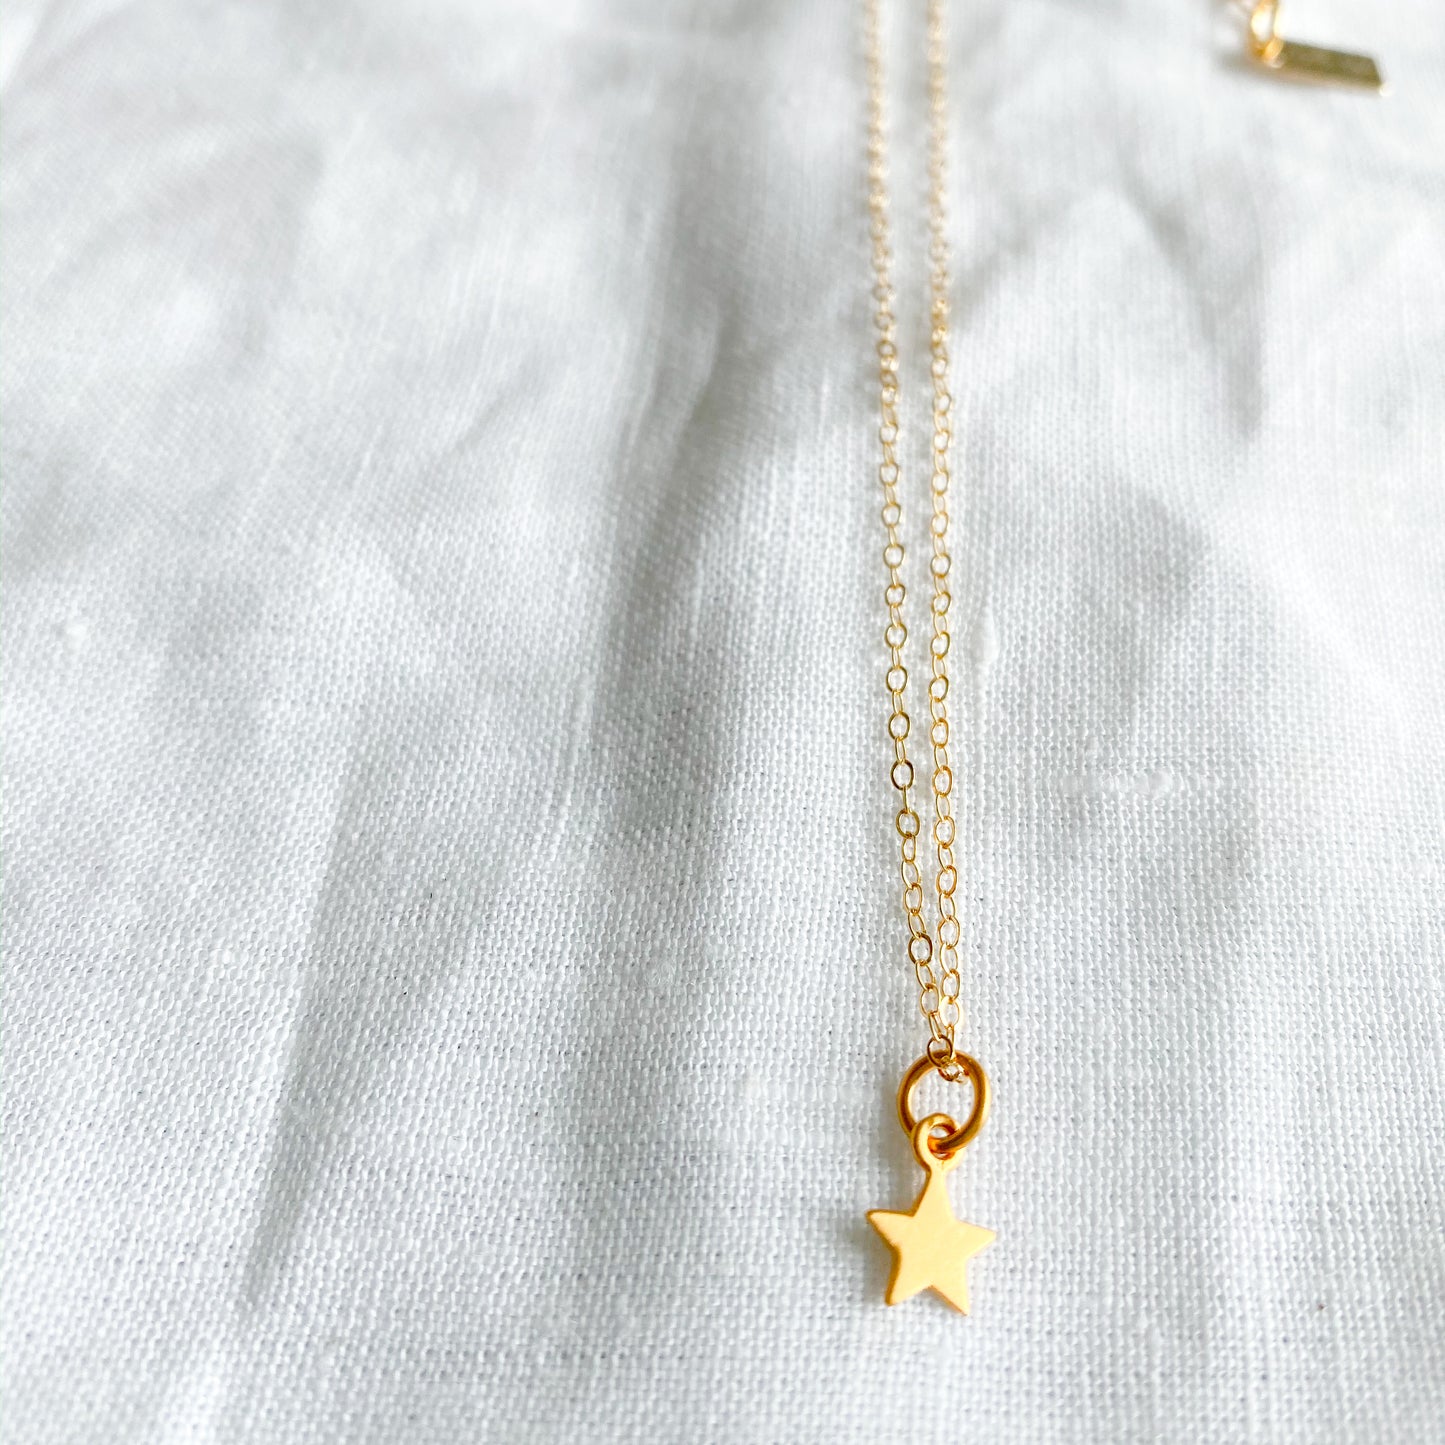 Star Necklace - BelleStyle